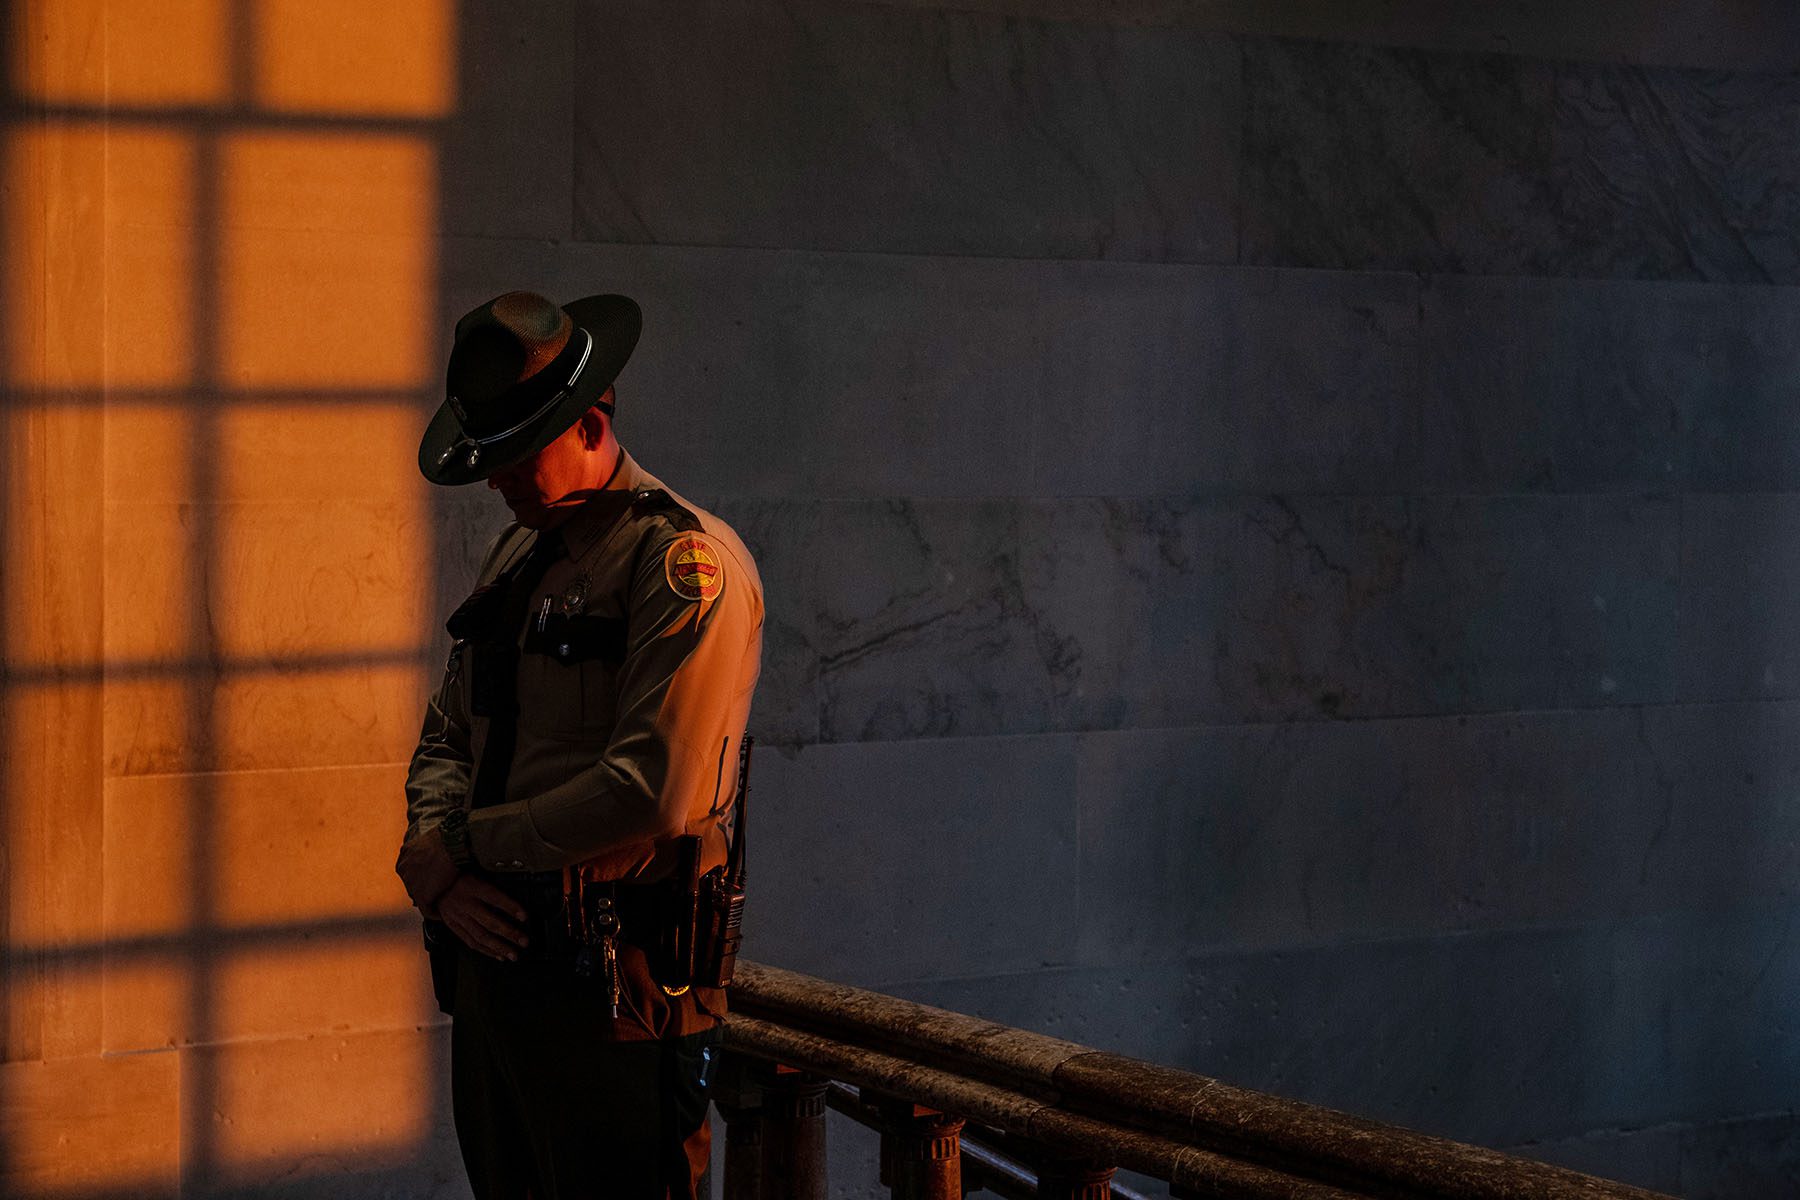 A Tennessee state trooper stands watch inside the Capitol building during a House session.